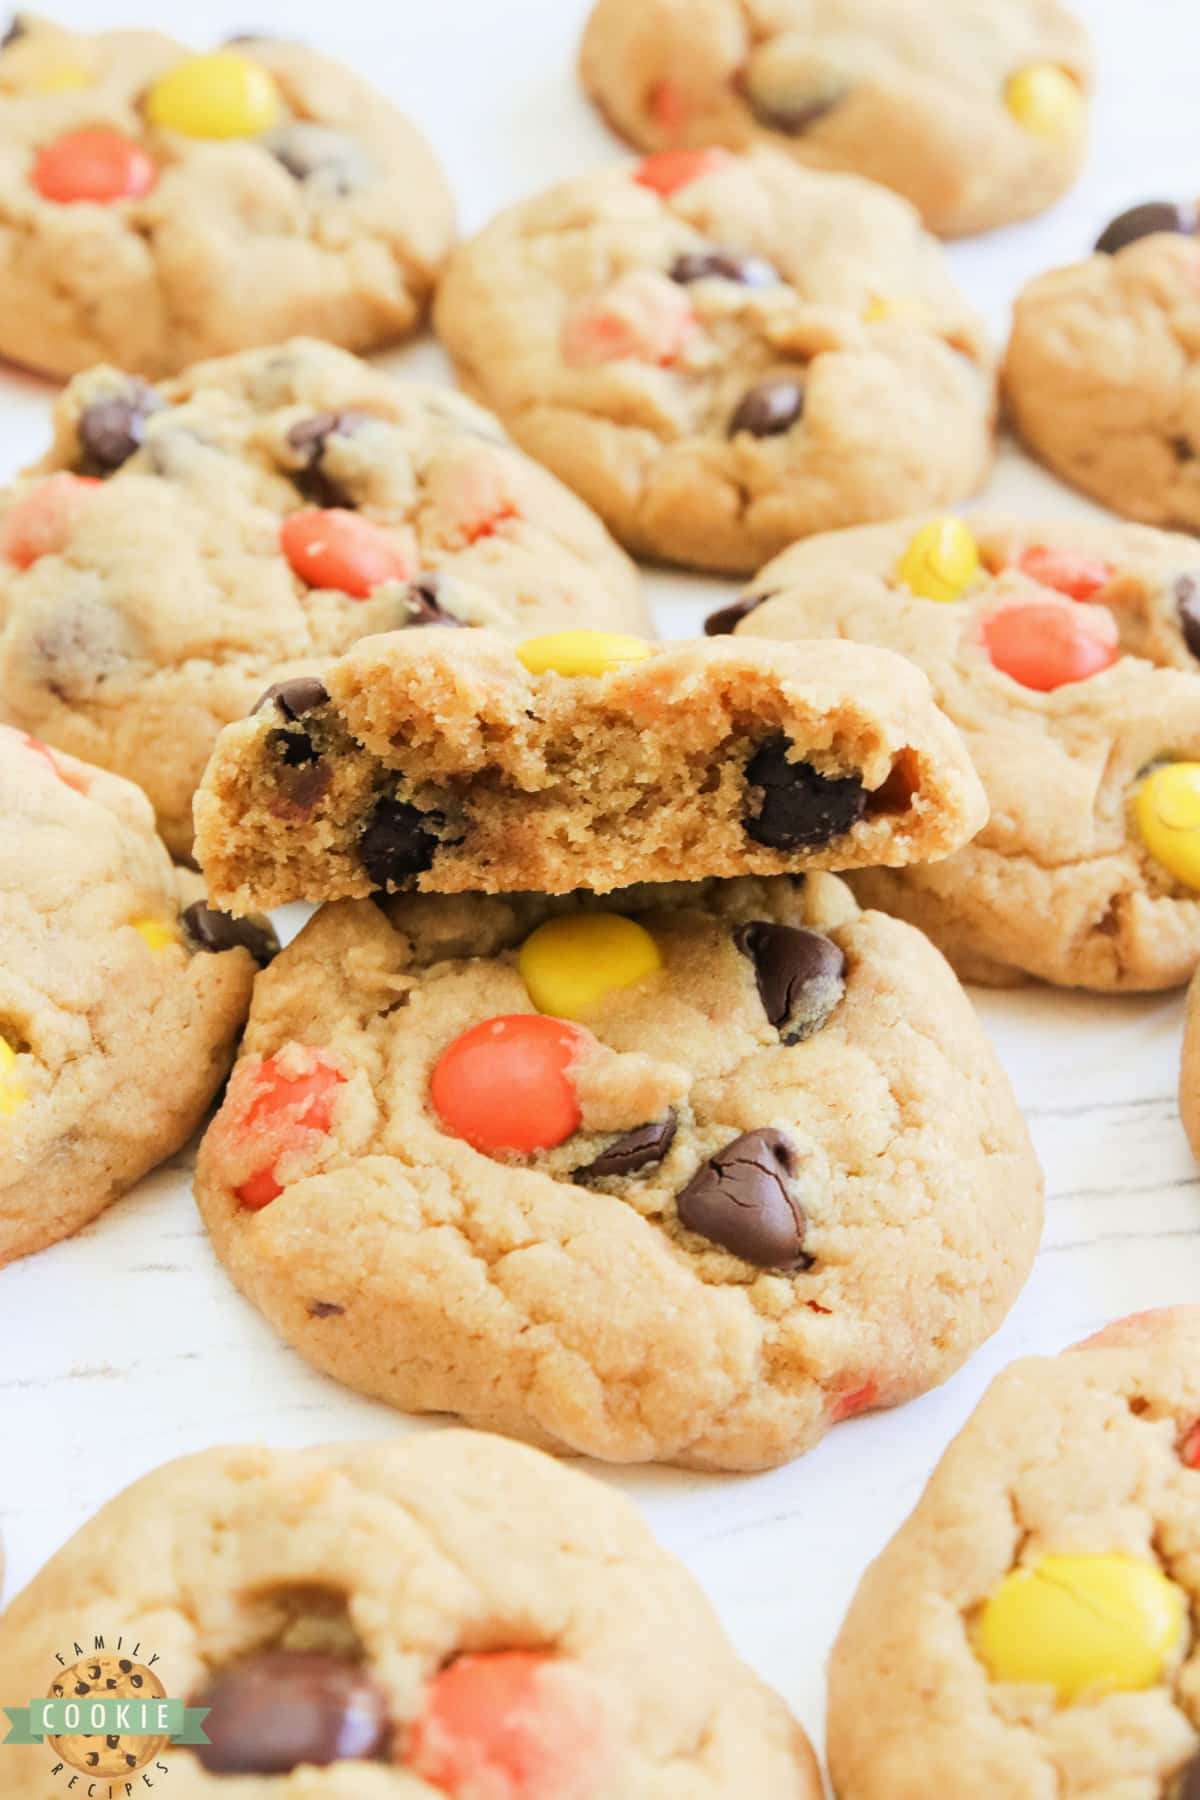 Peanut butter cookie recipe made with Reese's pieces.